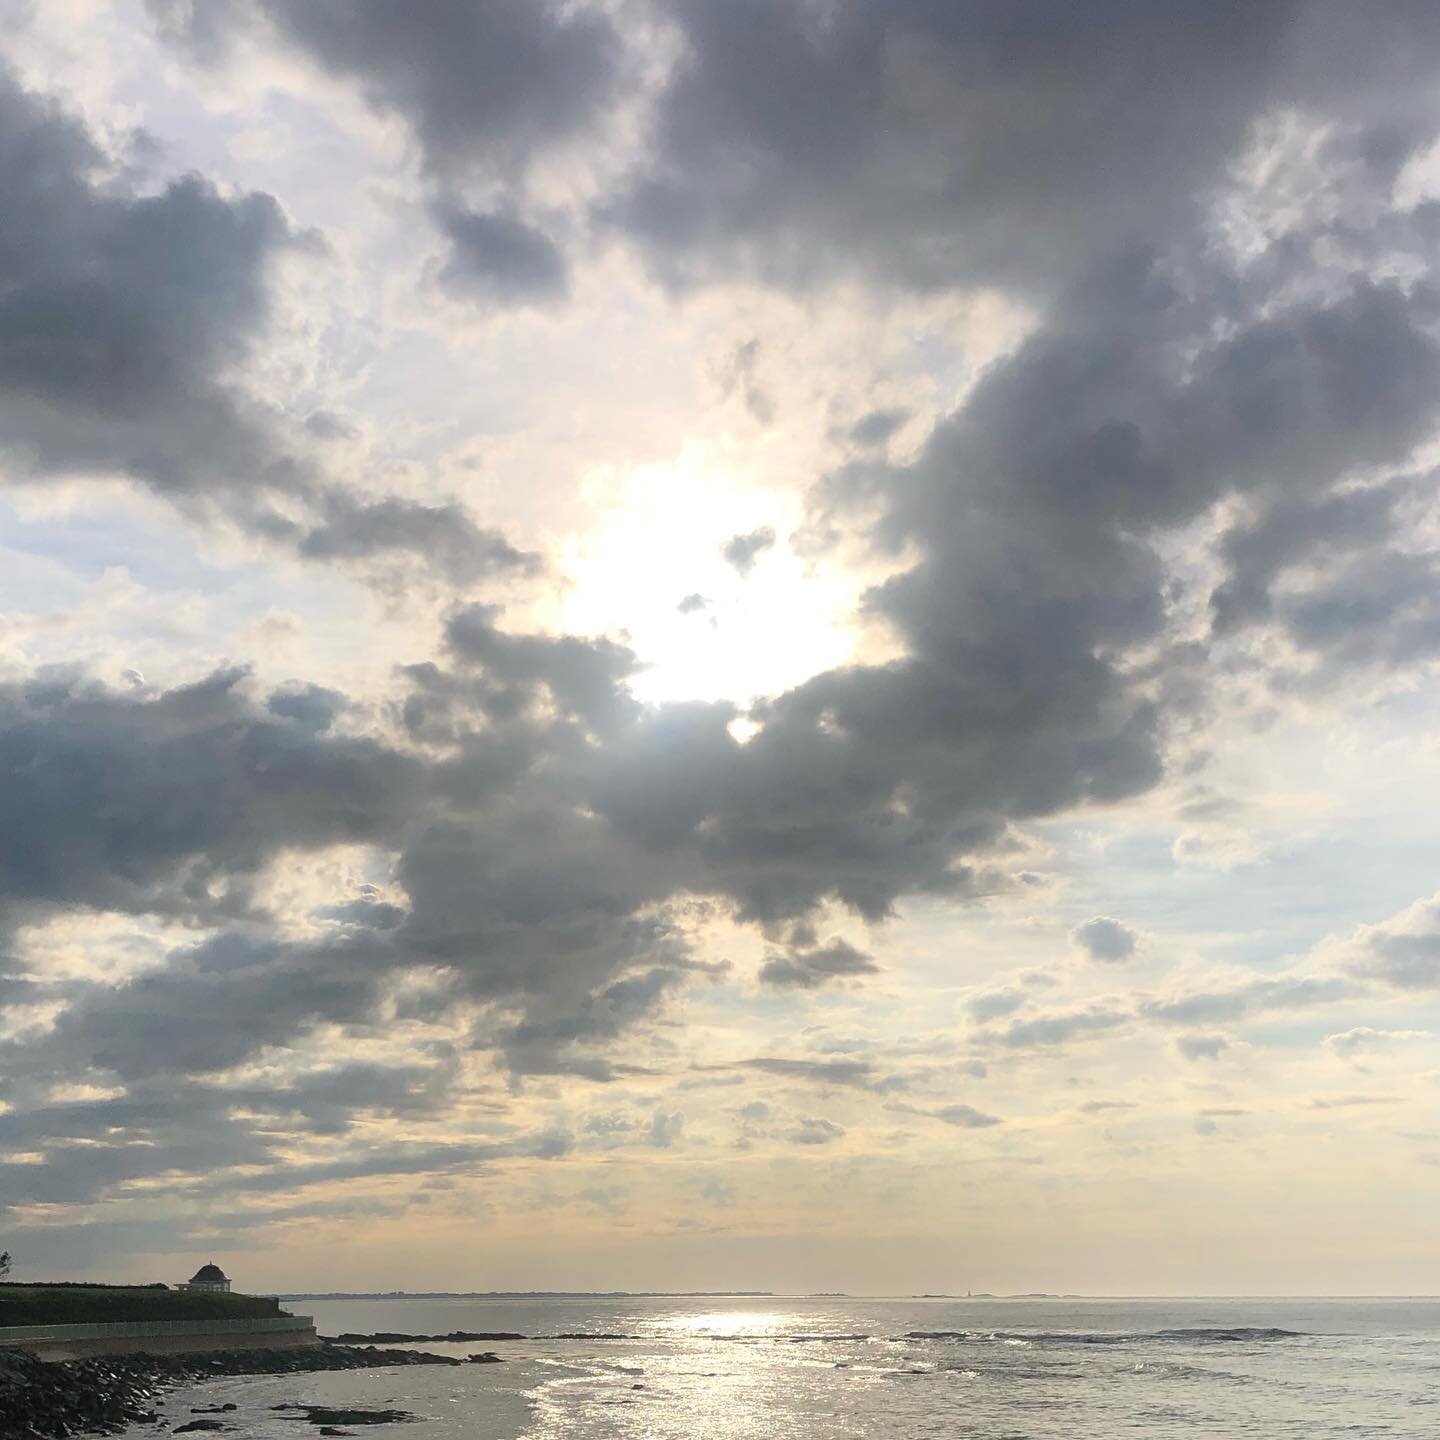 It wouldn&rsquo;t be Newport without some drama&hellip;. #artiseverywhere #goodmorning #beauty #sunrise #seascape #drama #art #gallery #artgallery #newportri #newport #newportgallery #citybythesea #bythesea #jessicahagen #newportartgallery #jessicaha